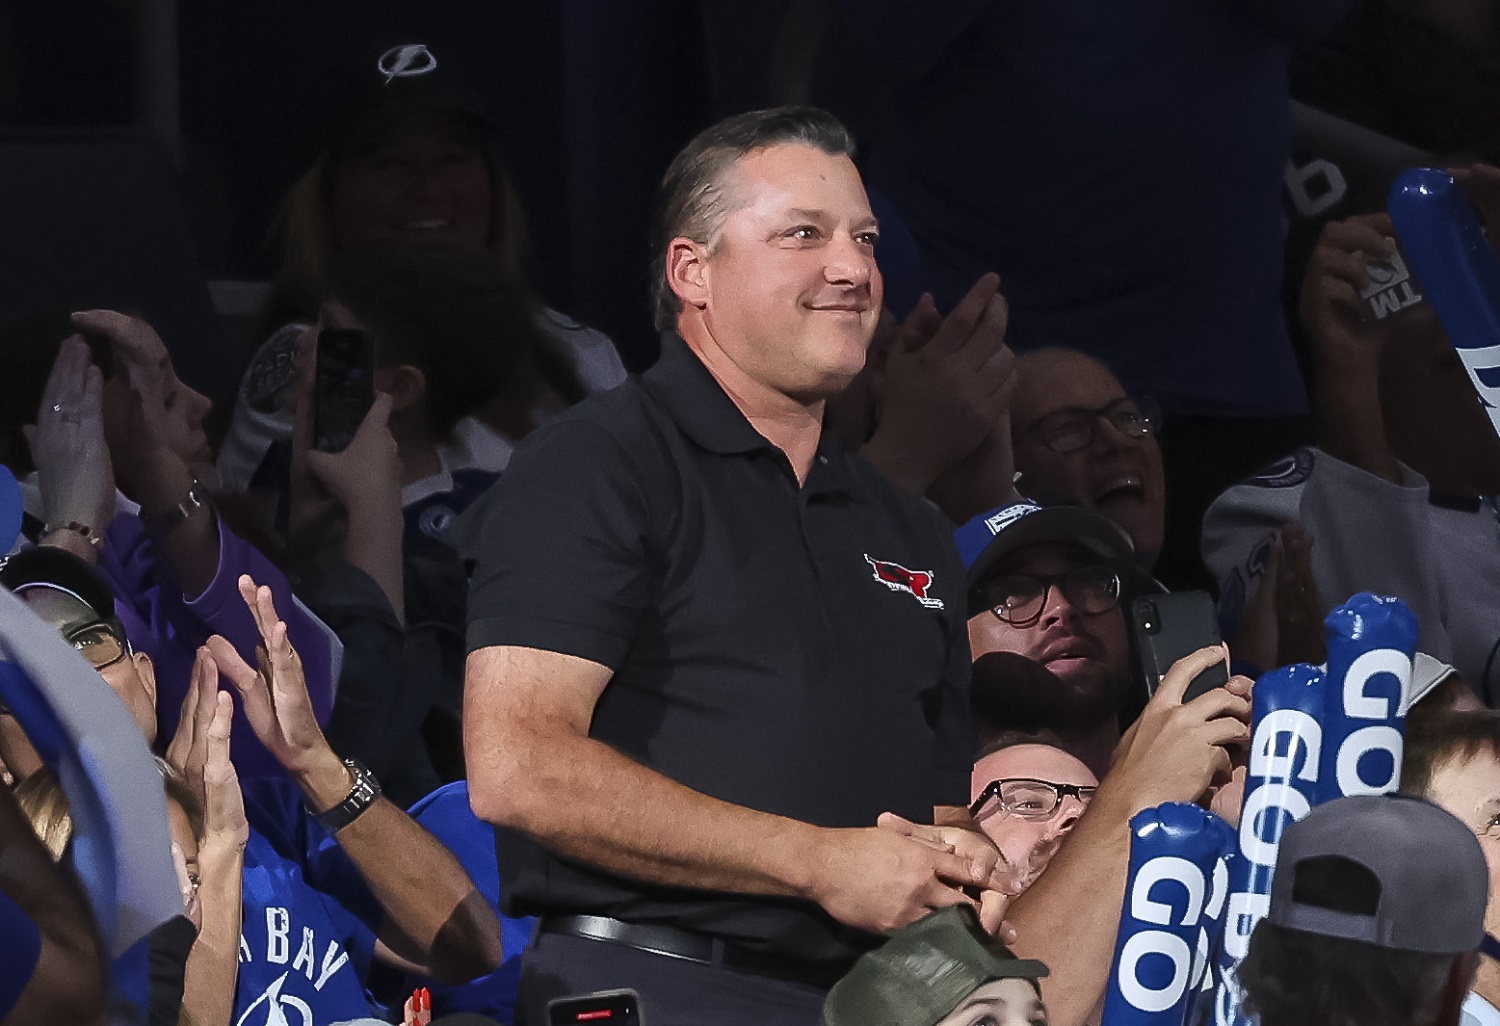 NASCAR Driver Tony Stewart makes an appearance at the game between the Tampa Bay Lightning against the Anaheim Ducks on Feb. 21, 2023 in Tampa, Florida. | Mark LoMoglio/NHLI via Getty Images